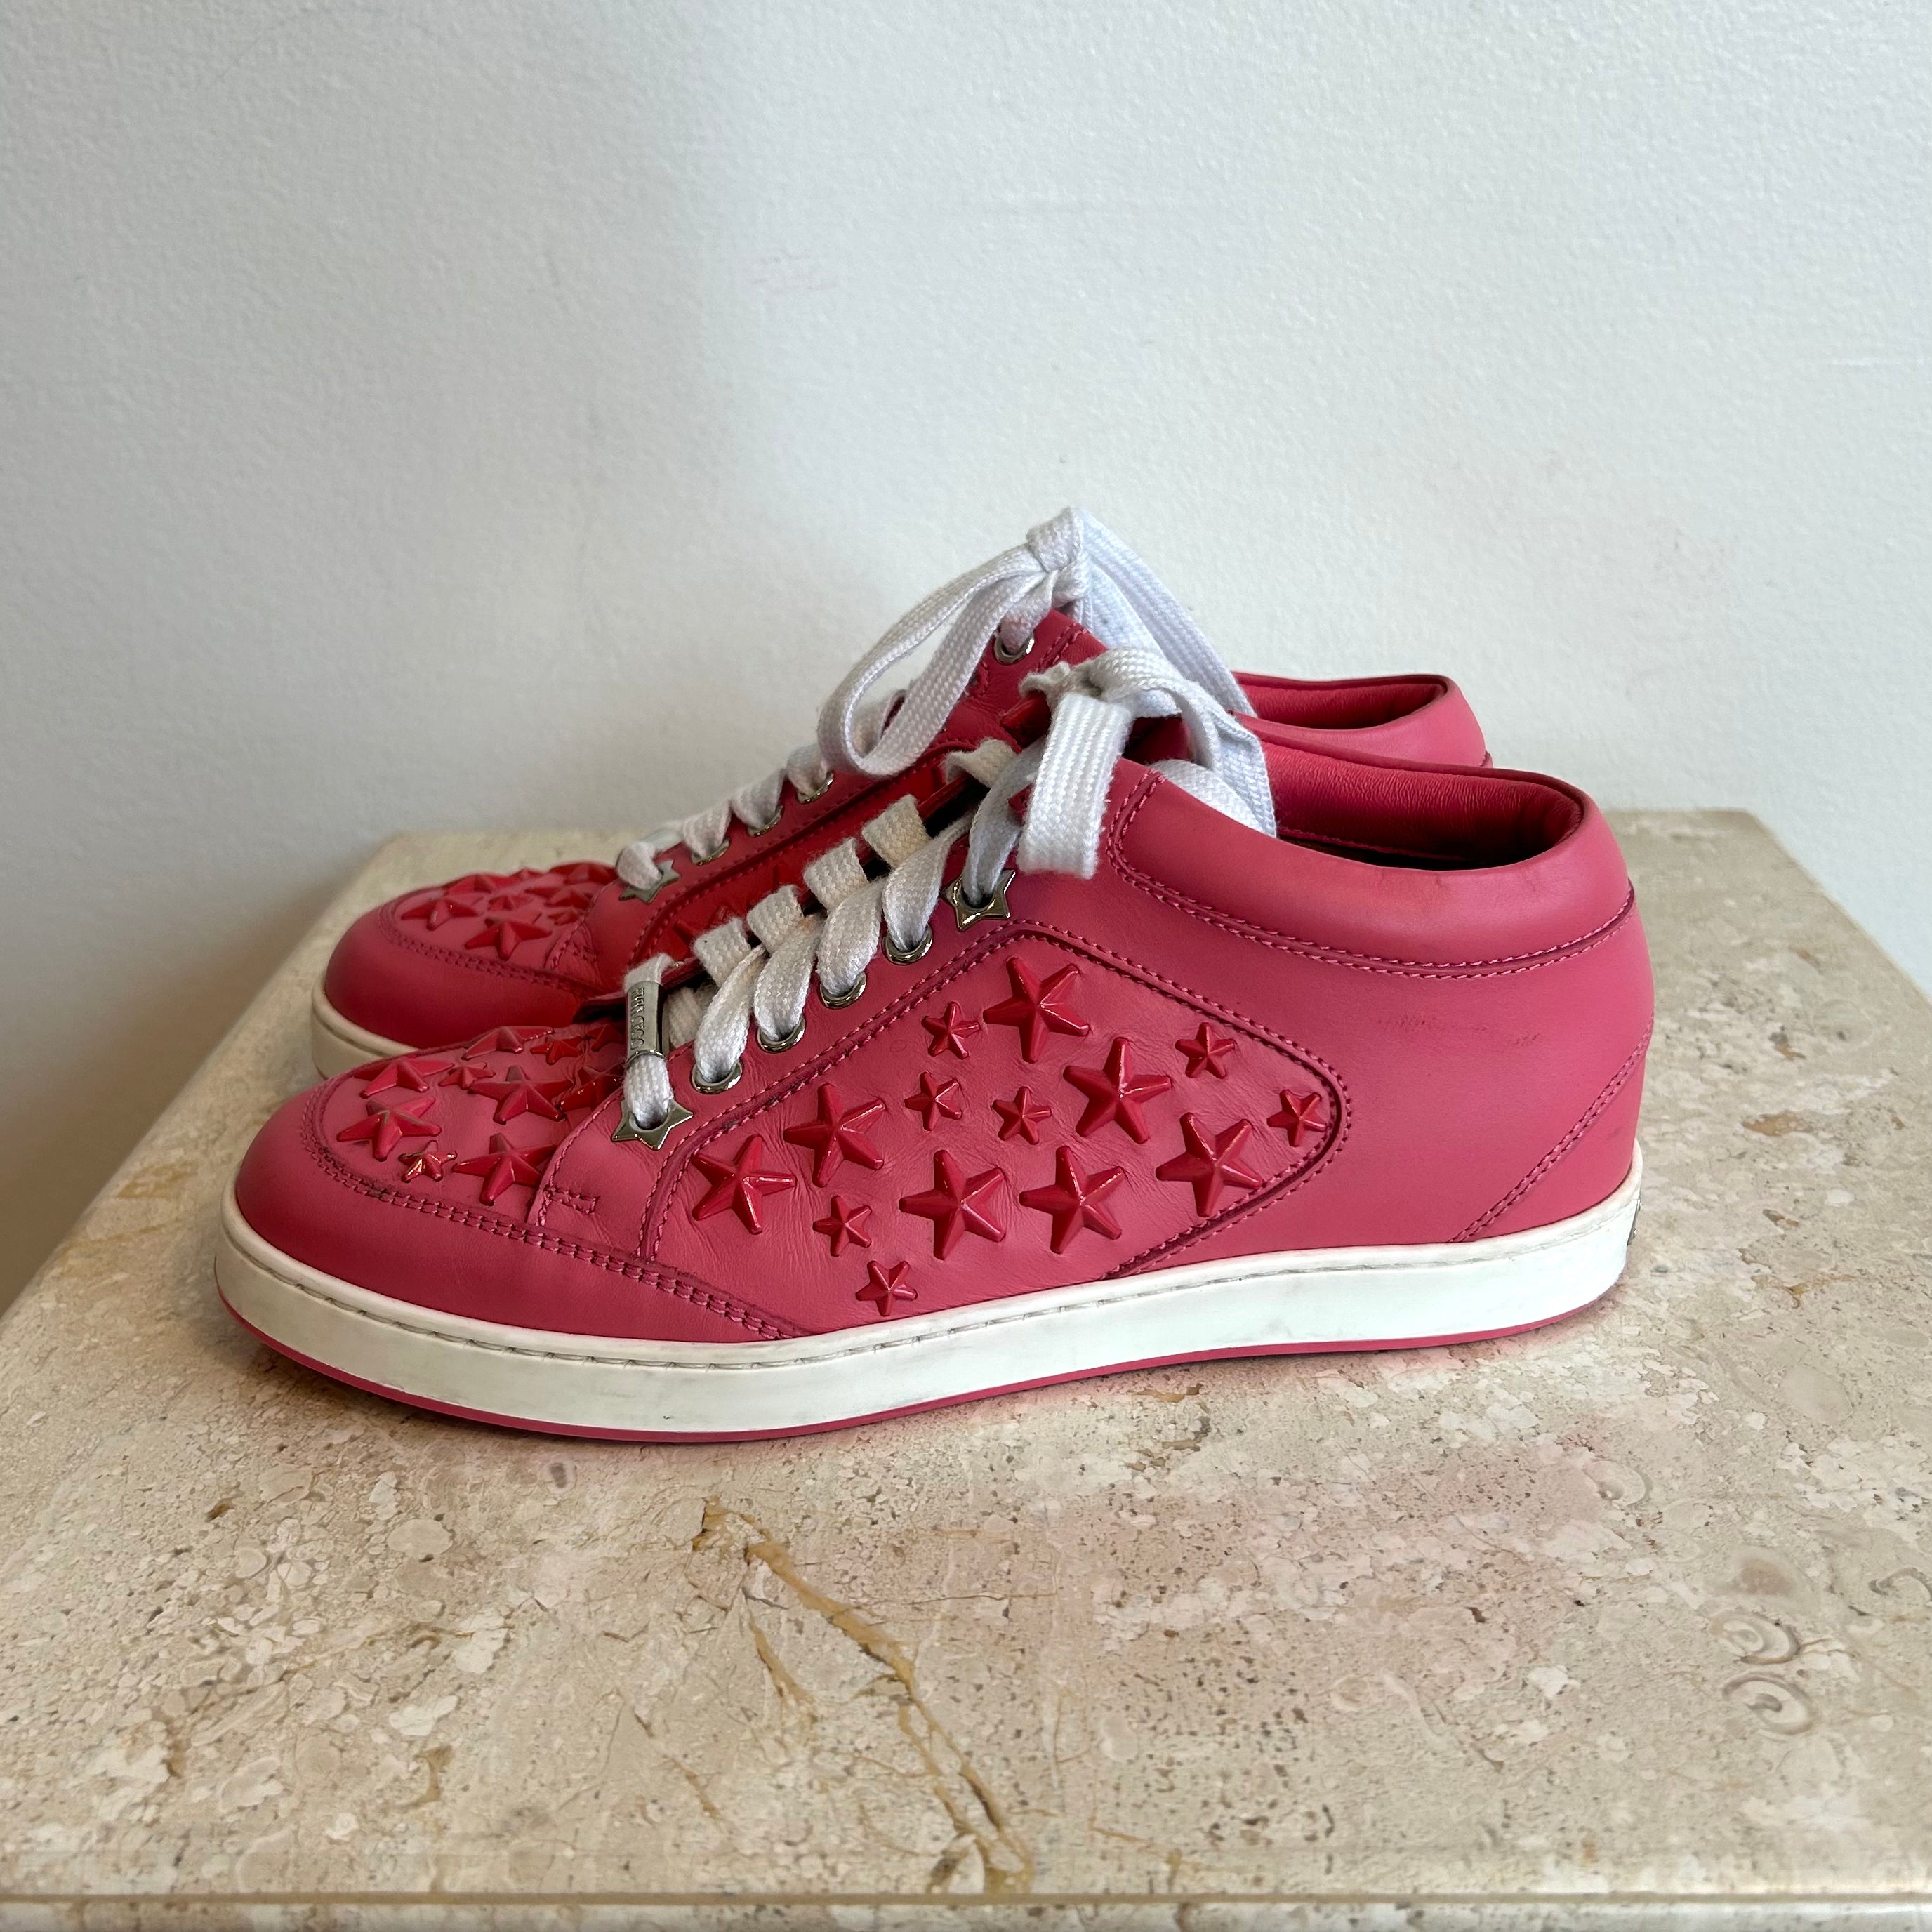 Pre-Owned JIMMY CHOO Miami Flamingo with Stars Sneakers - Size 35